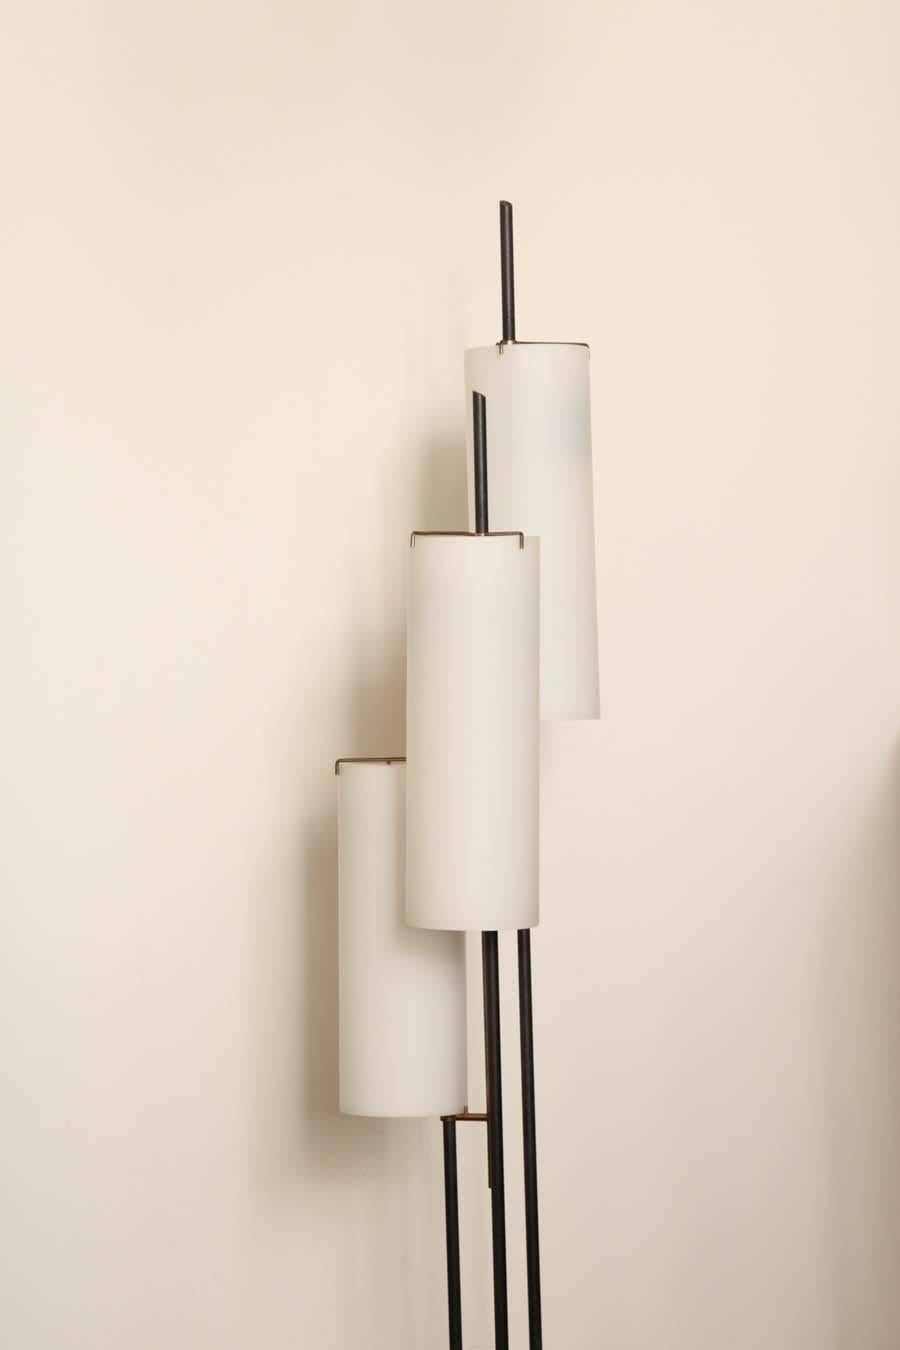 Modernist floor lamp made in Milan, 1950 by Stilnovo, three way light  switch, white glass shades, black finish stem with brass on a white marble base, great quality. 